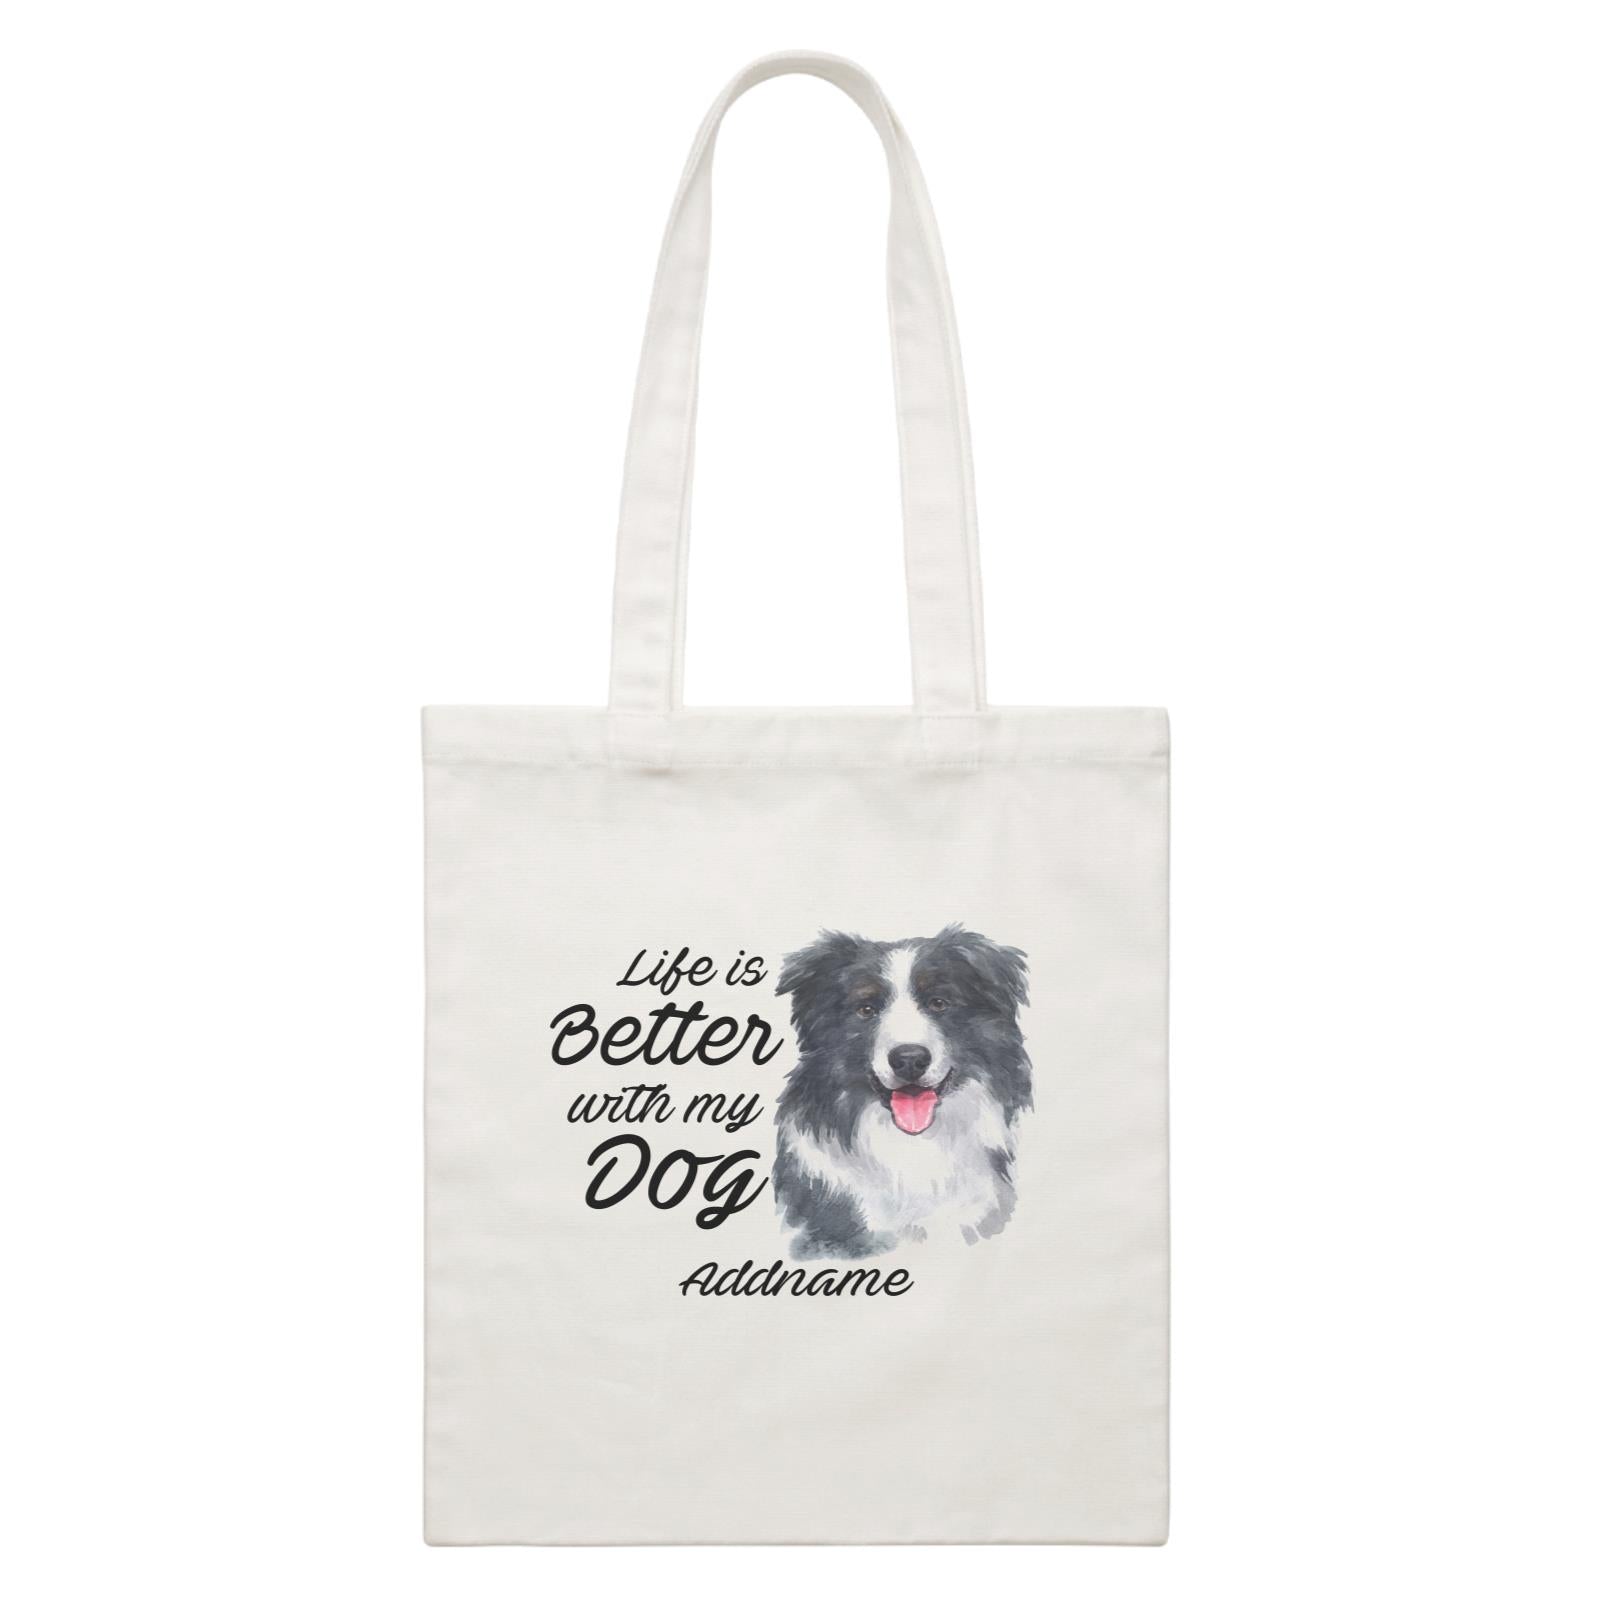 Watercolor Life is Better With My Dog Border Collie Addname White Canvas Bag